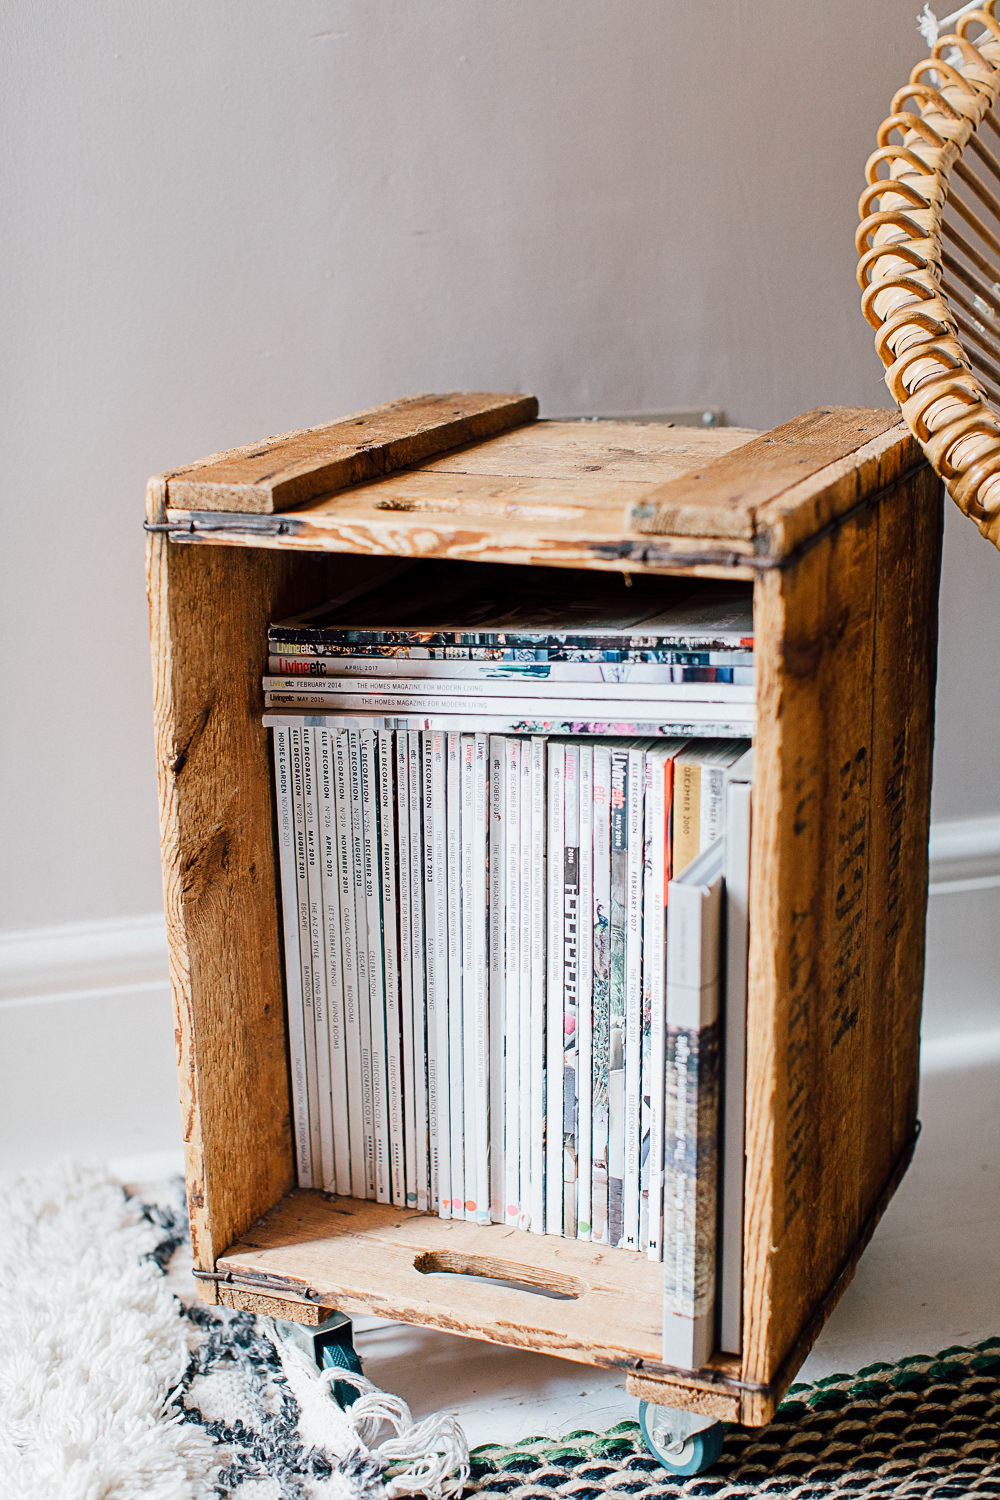 Wooden vintage crate filled with magazines